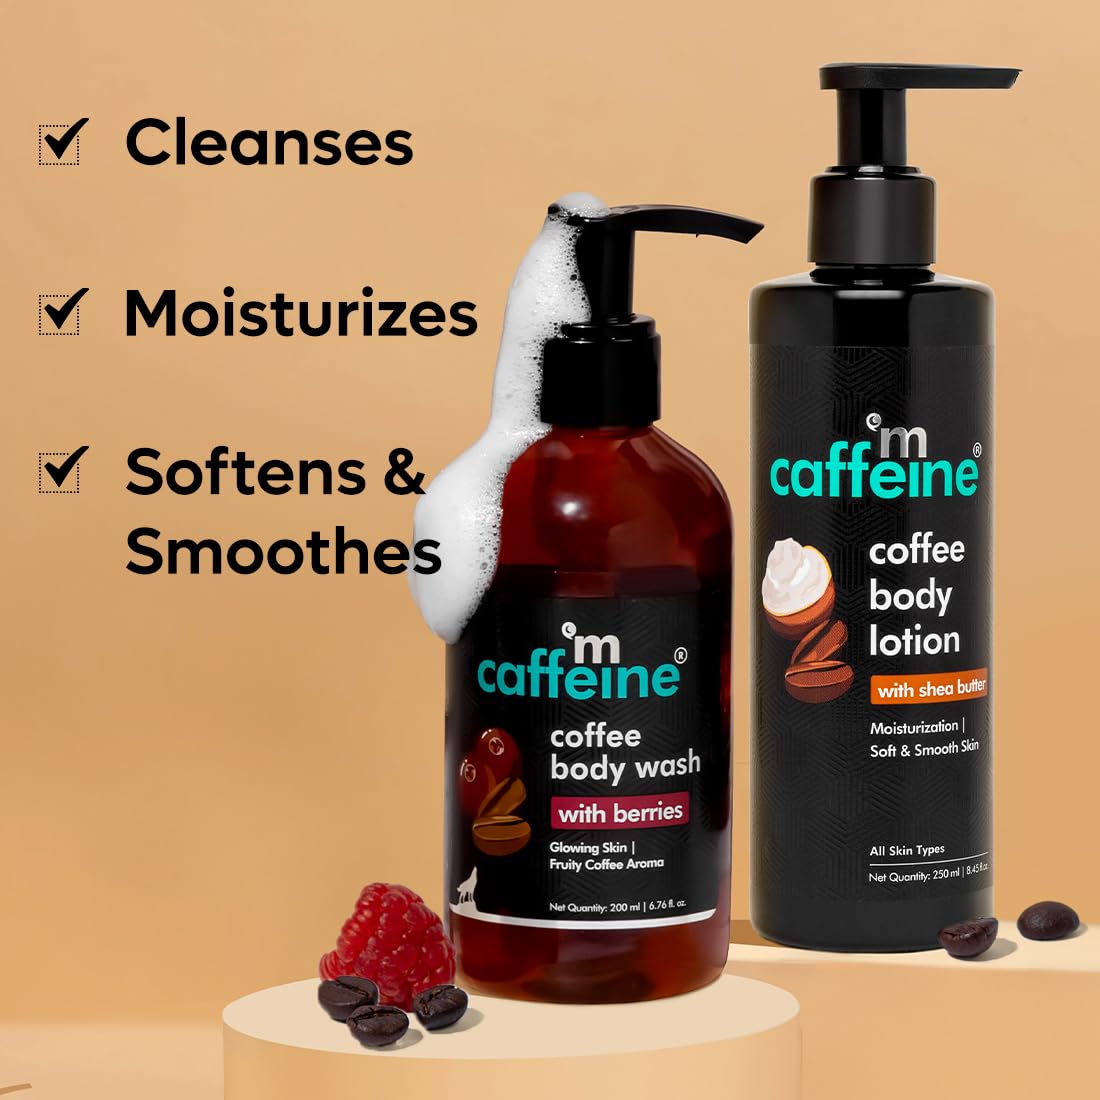 mCaffeine Daily Cleanse and moisturize Kit